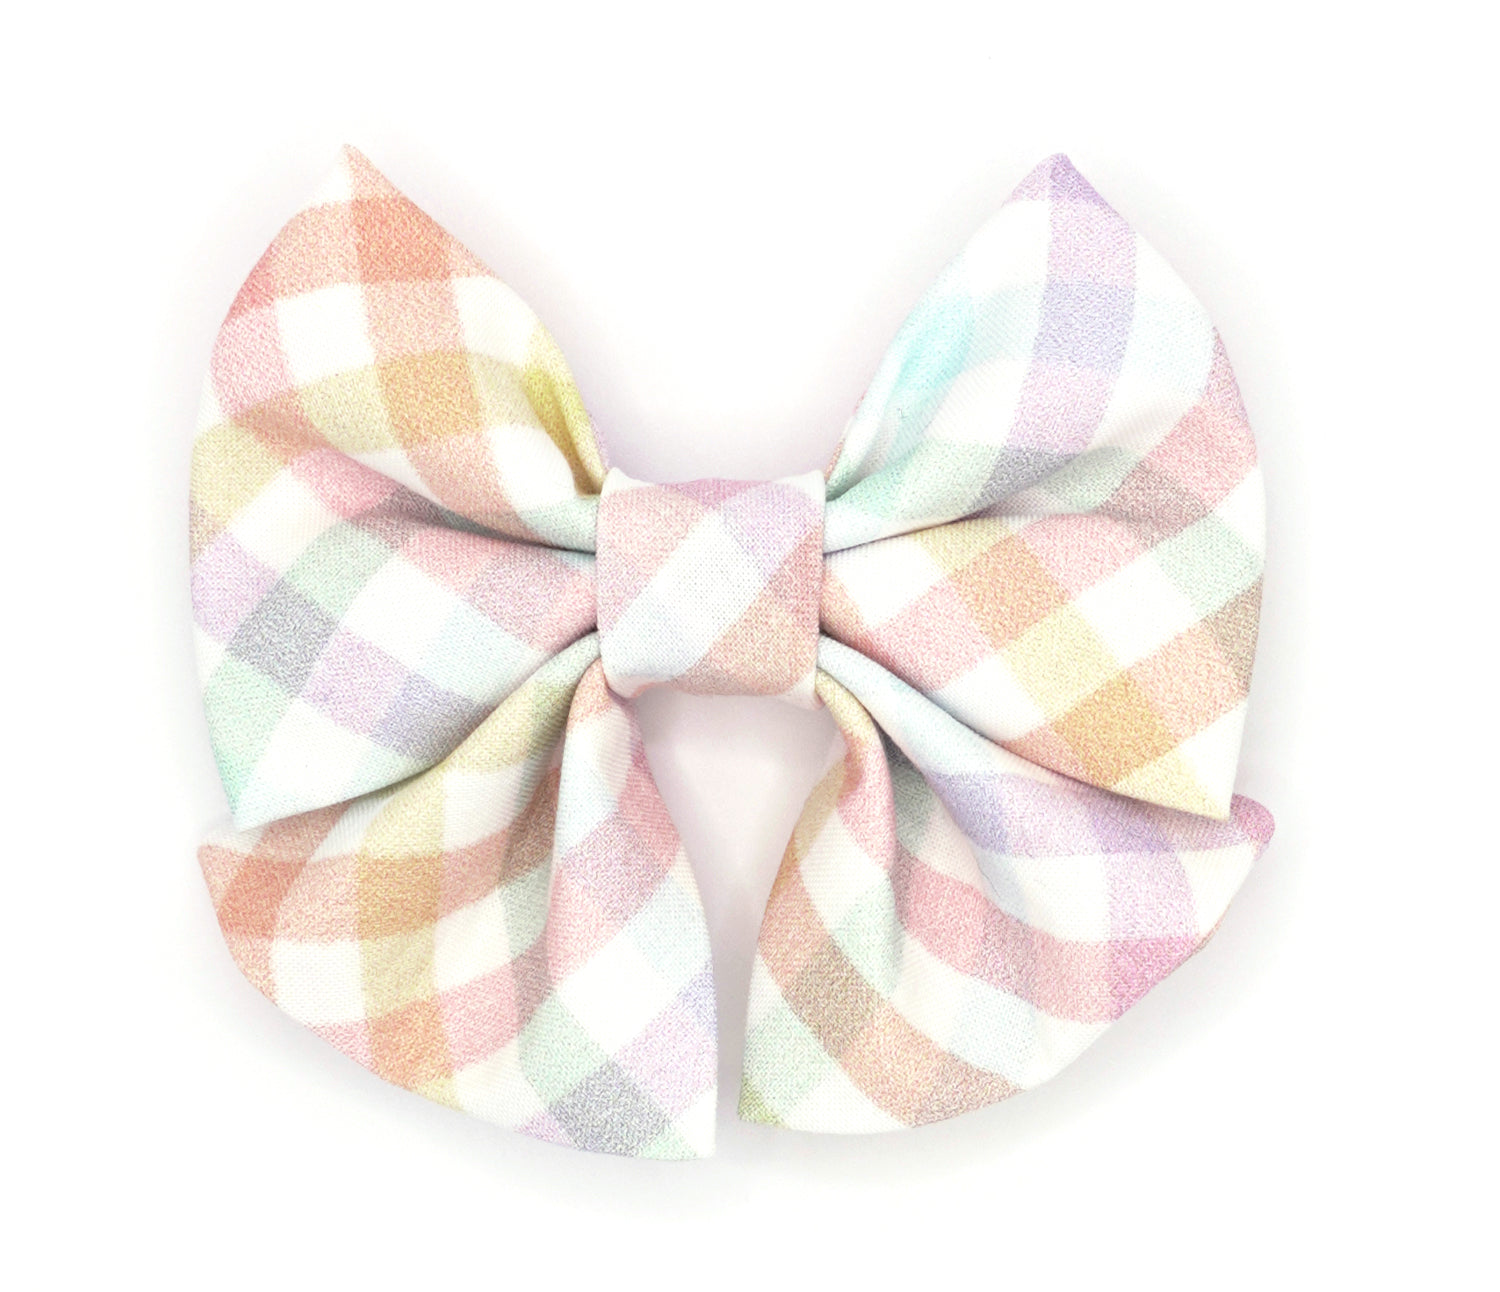 Handmade cotton bow tie with tails for dogs (or other pets). Elastic straps on back with snaps make it easy to add to collar, harness, or leash. White background with pastel rainbow plaid pattern.